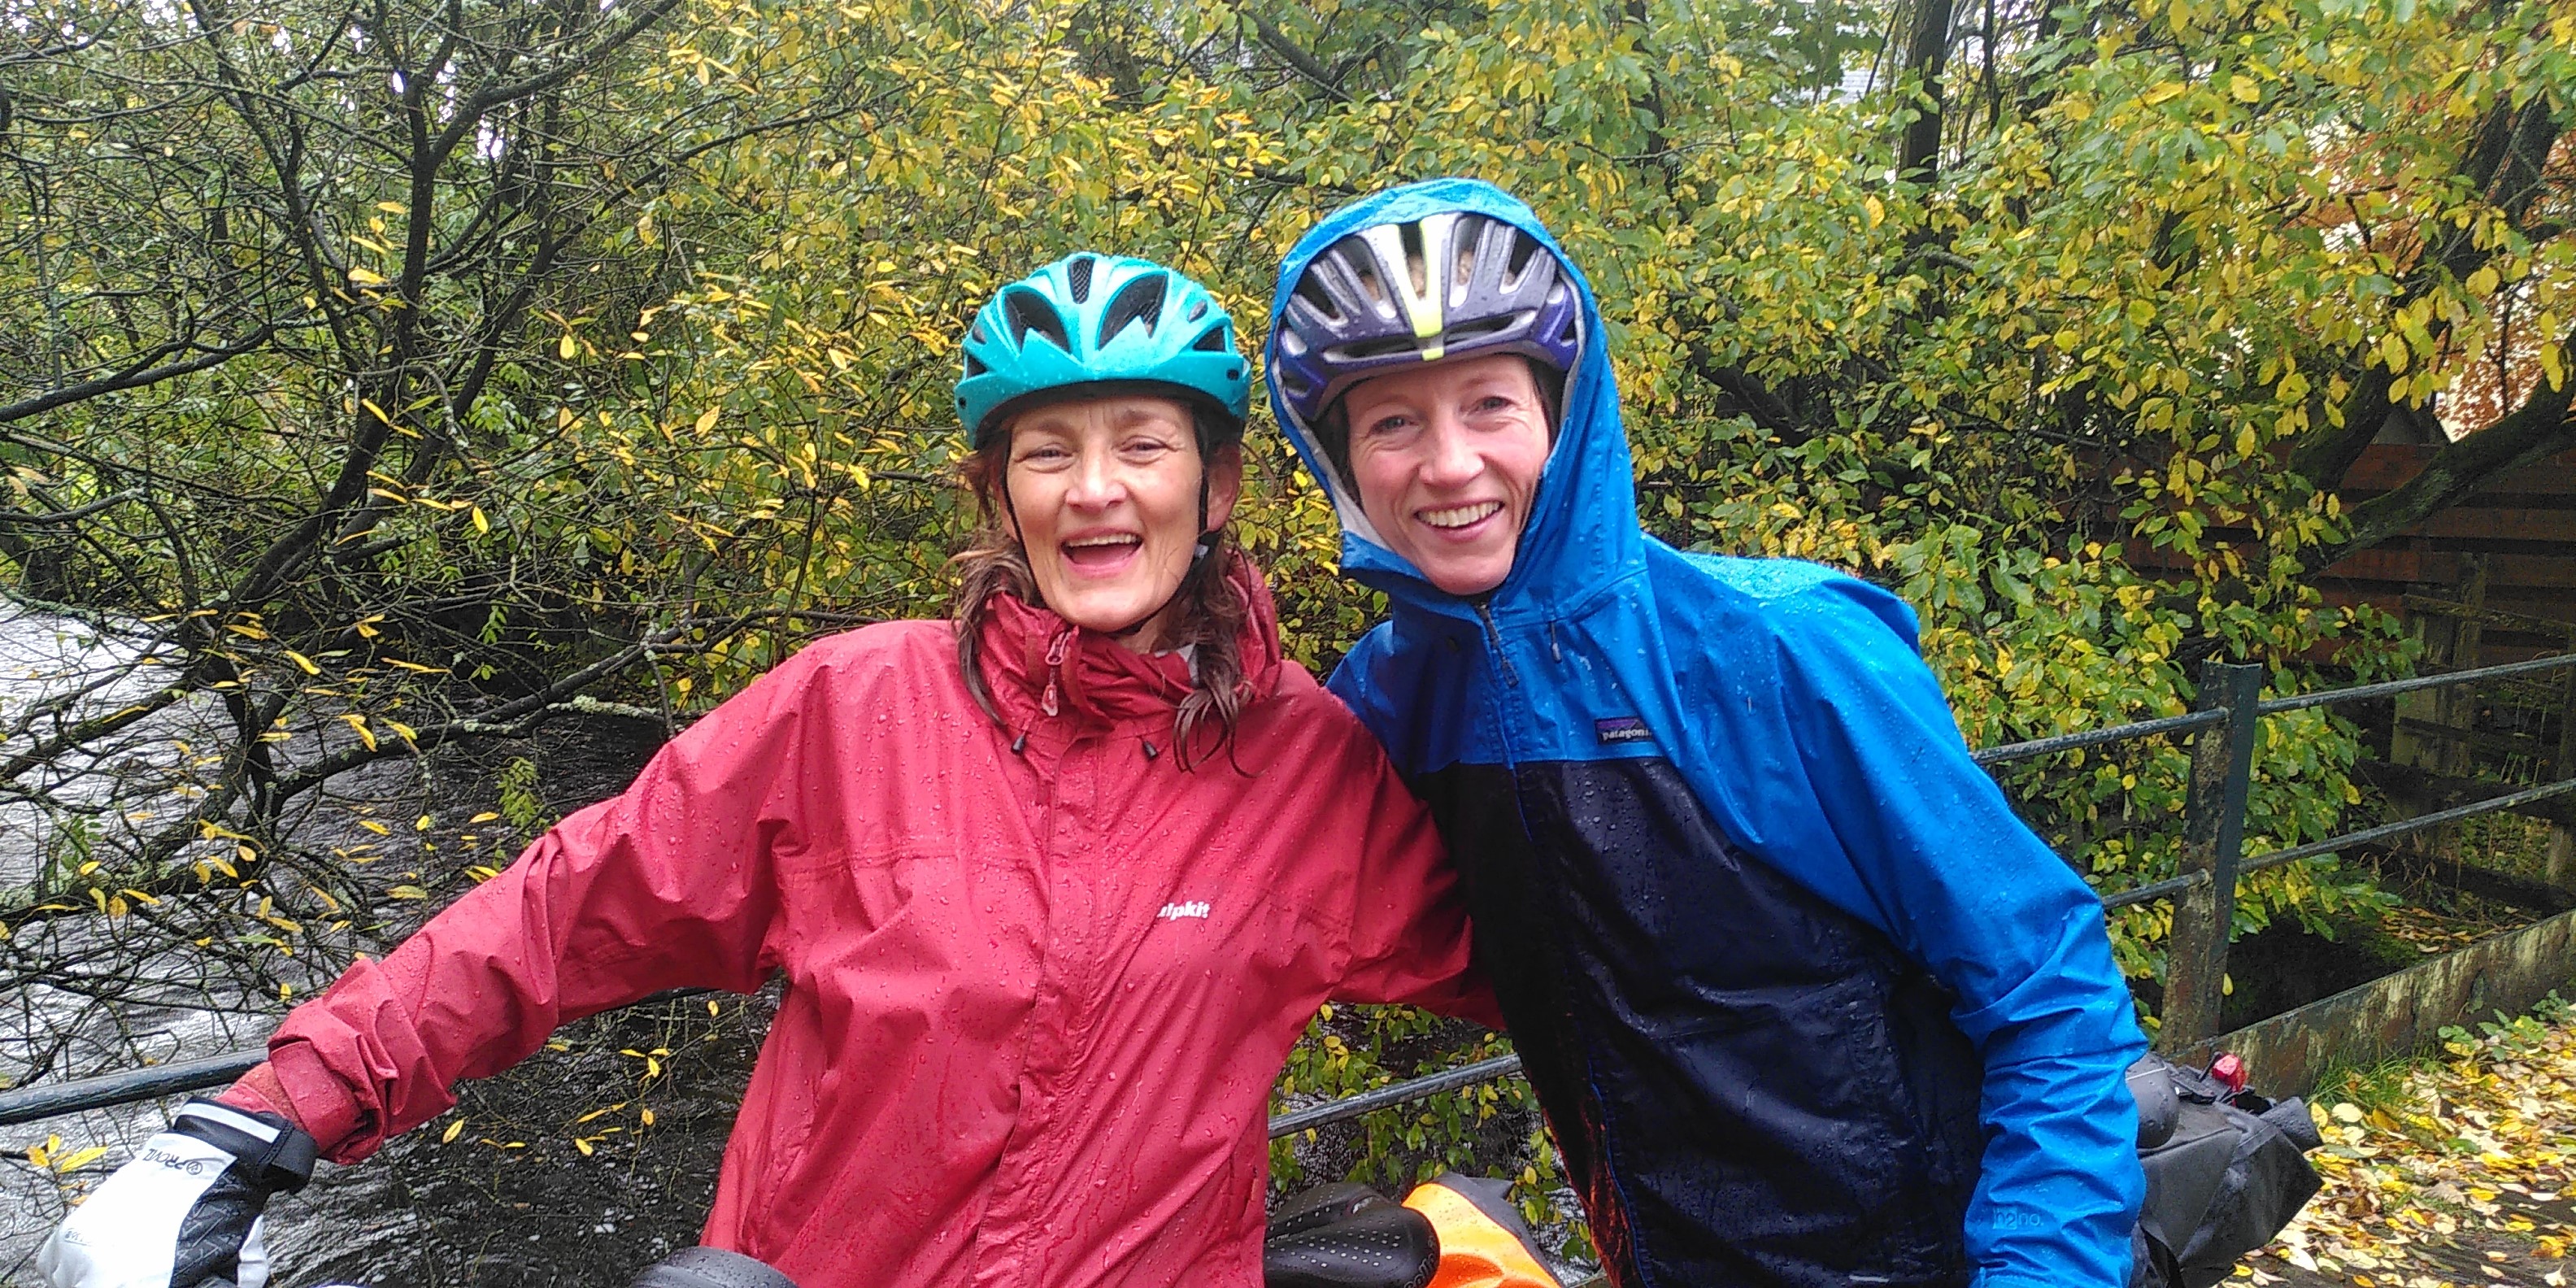 Catriona and a fellow rider on day six 